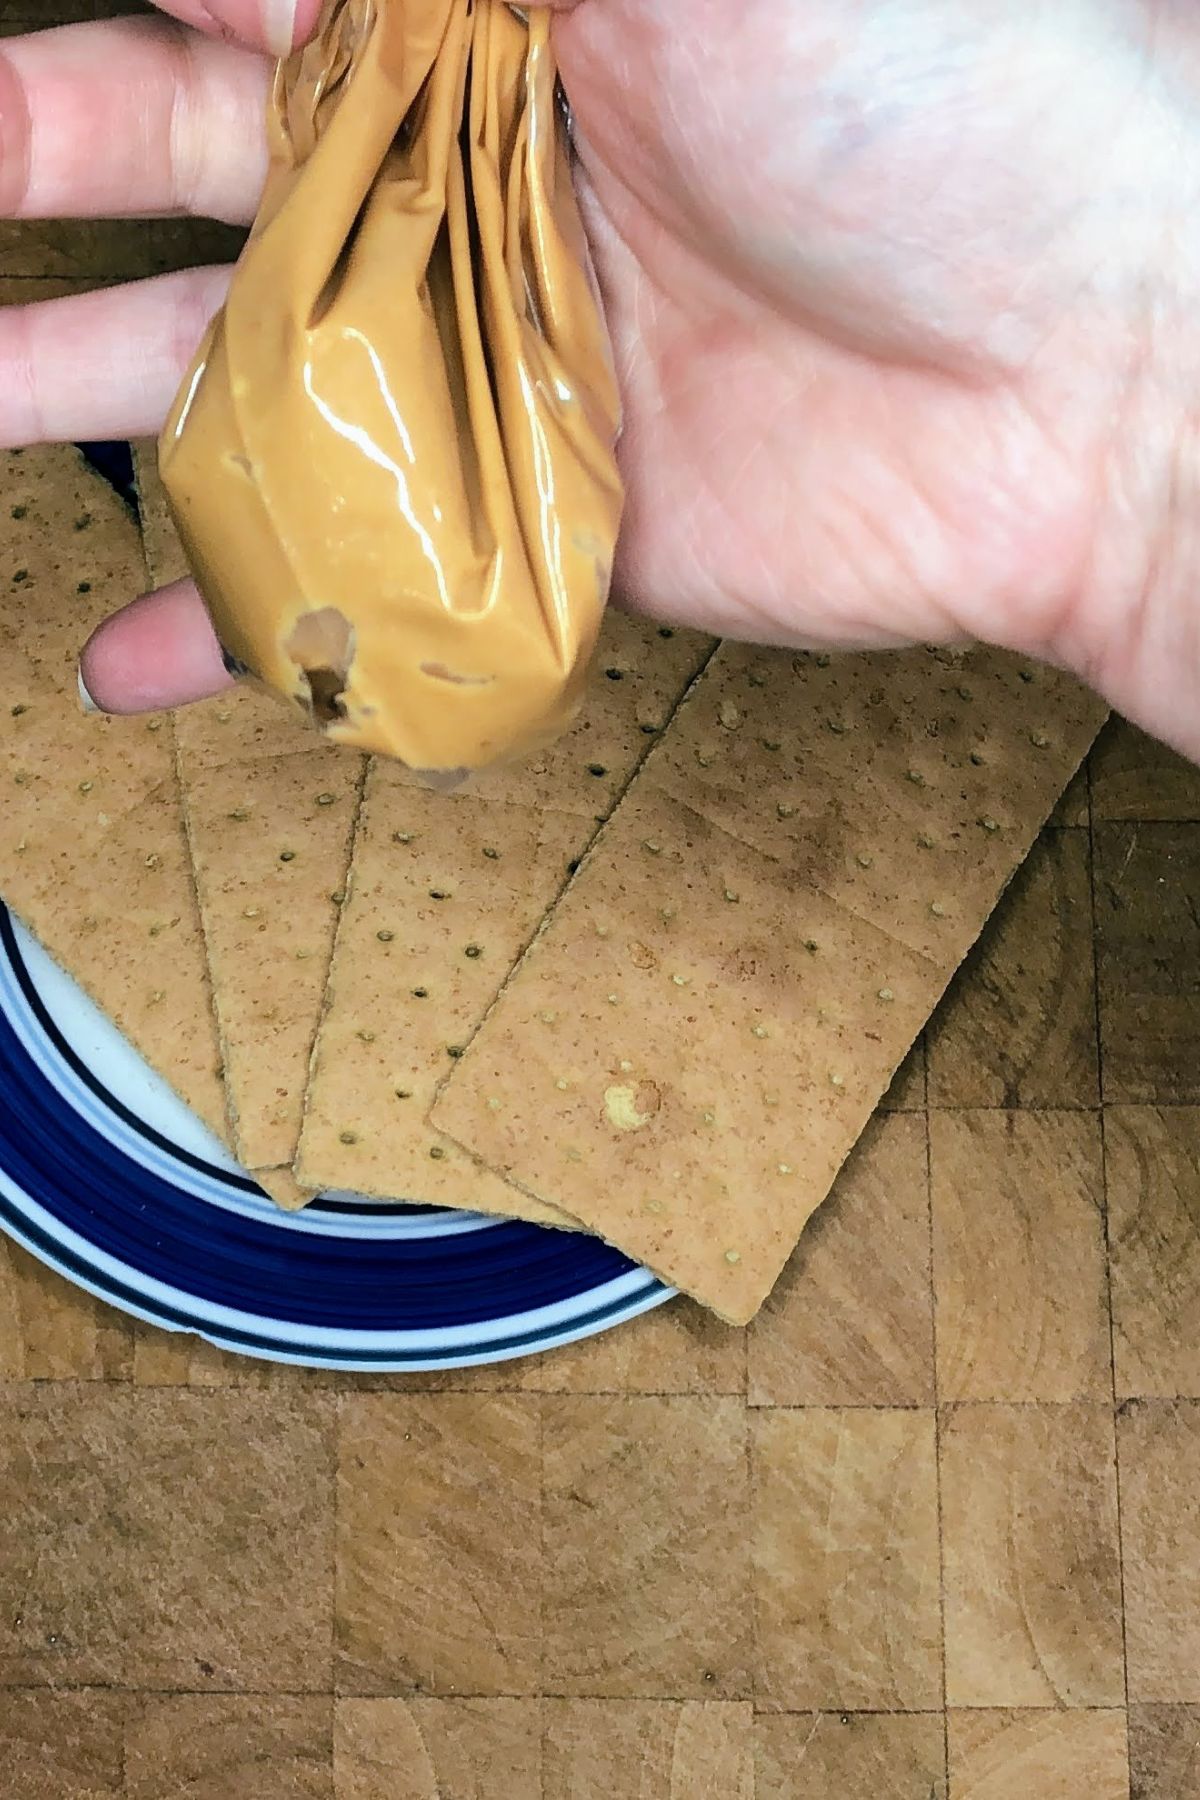 Peanut butter squeezed into the corner of a ziplock bag.